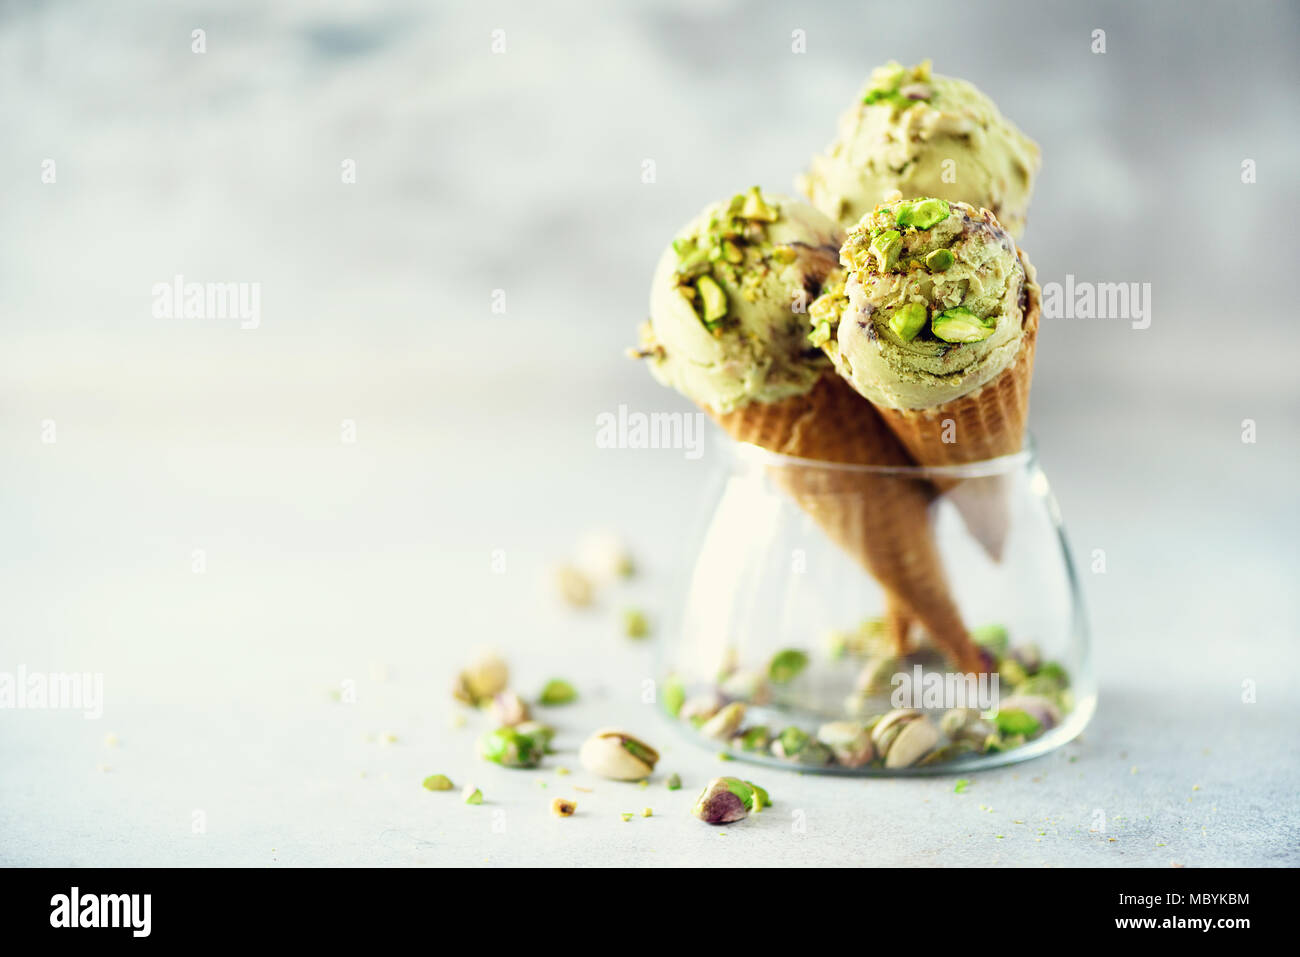 Green ice cream in waffle cone with chocolate and pistachio nuts on grey stone background. Summer food concept, copy space. Healthy gluten free ice-cream. Stock Photo